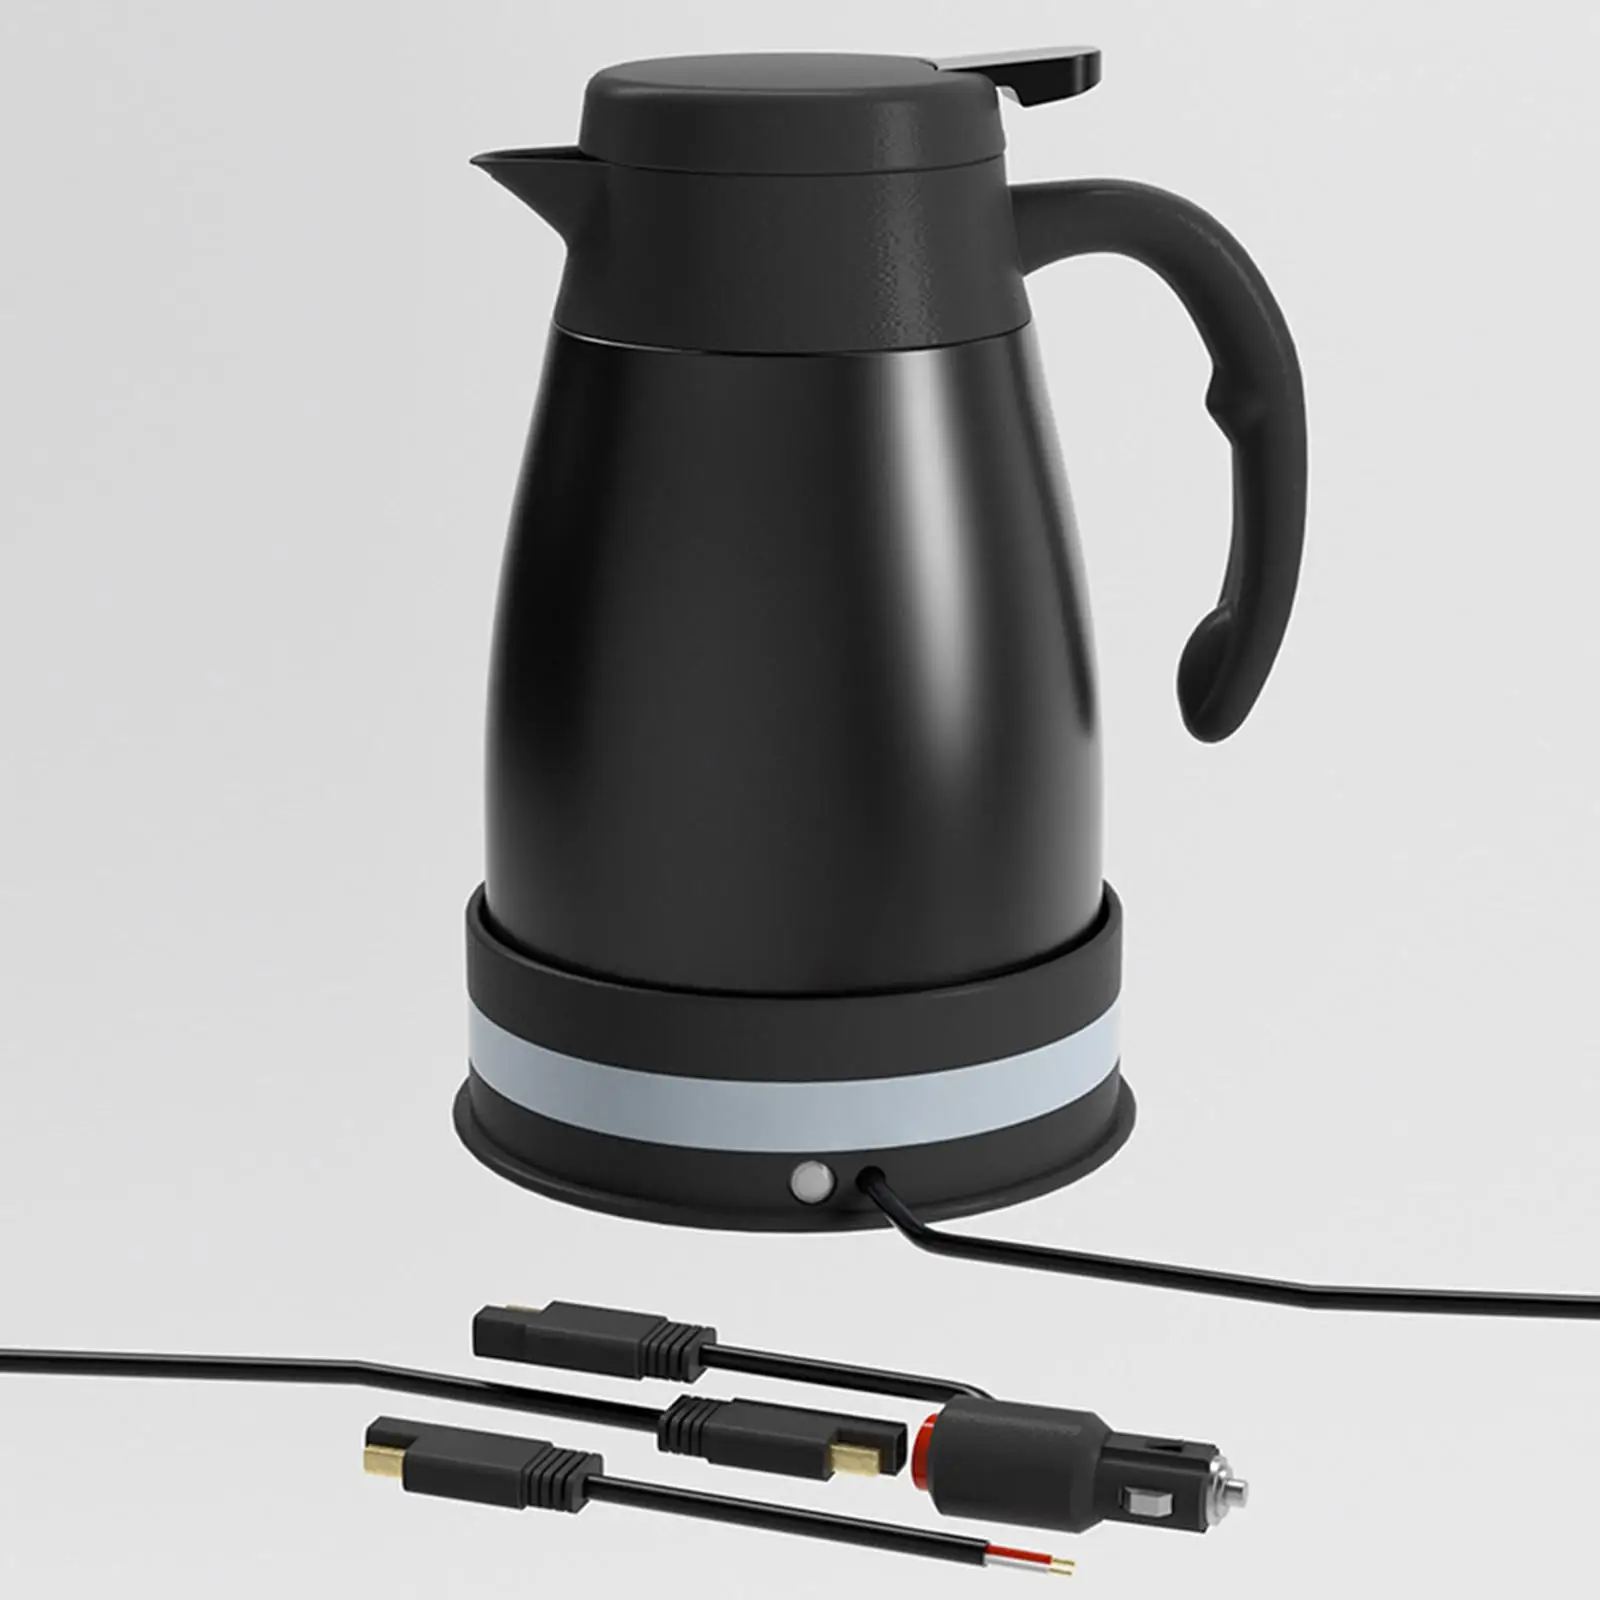 Car Electric Kettle Pot DC 24V Stainless Steel Portable Fast Boiling Portable Auto Shut Off Kettle Boiler for Road Trips